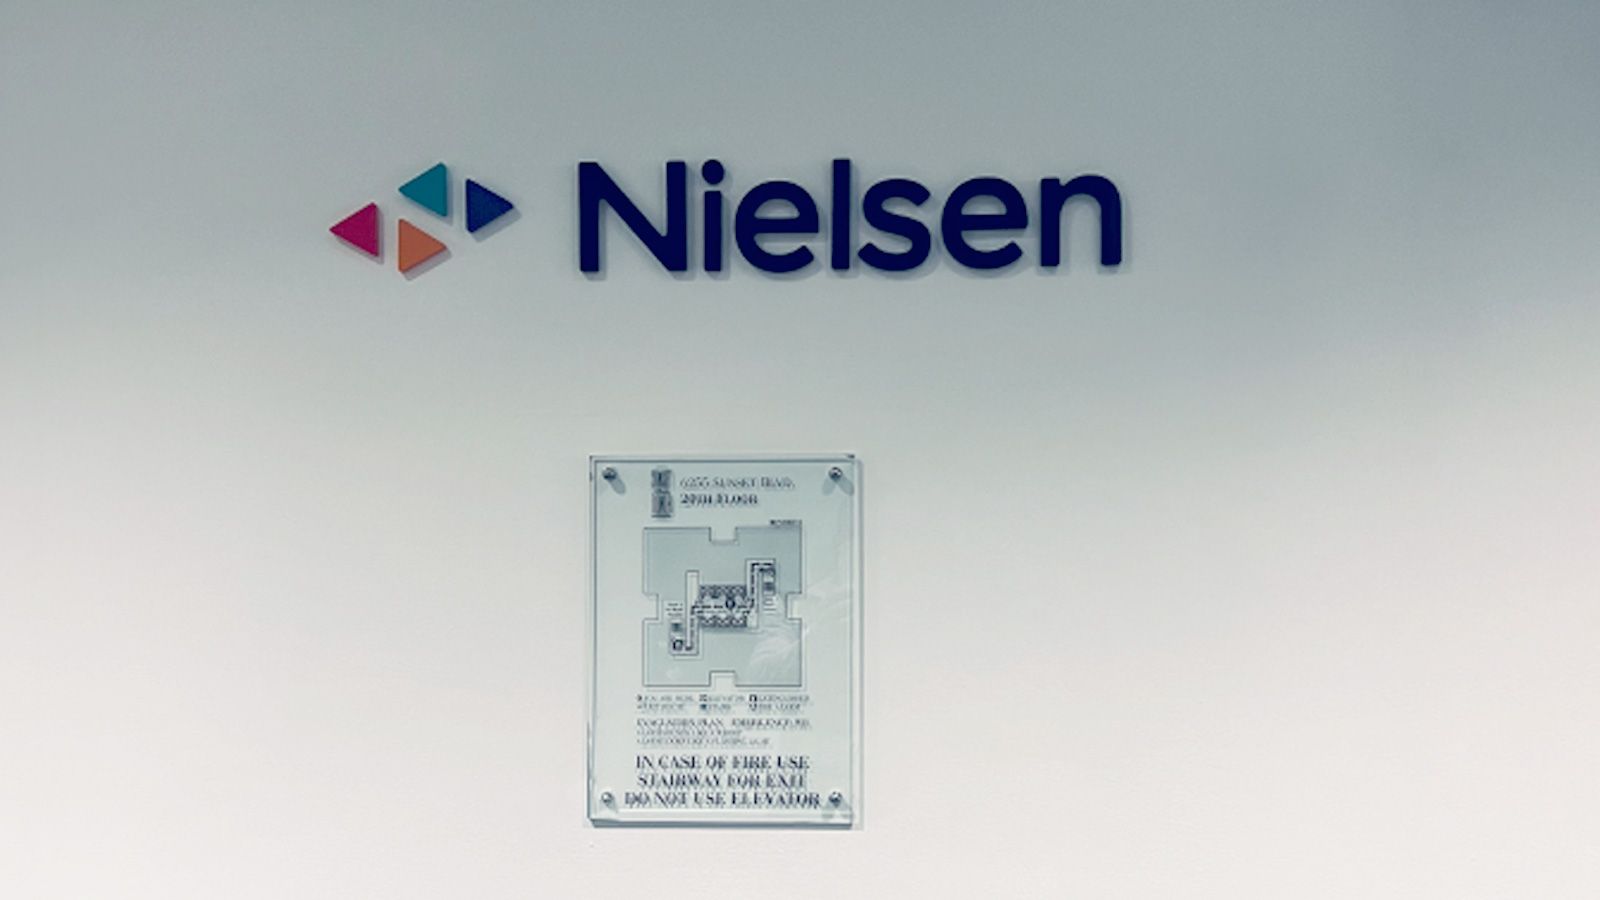 Nielsen 3D sign attached to the wall